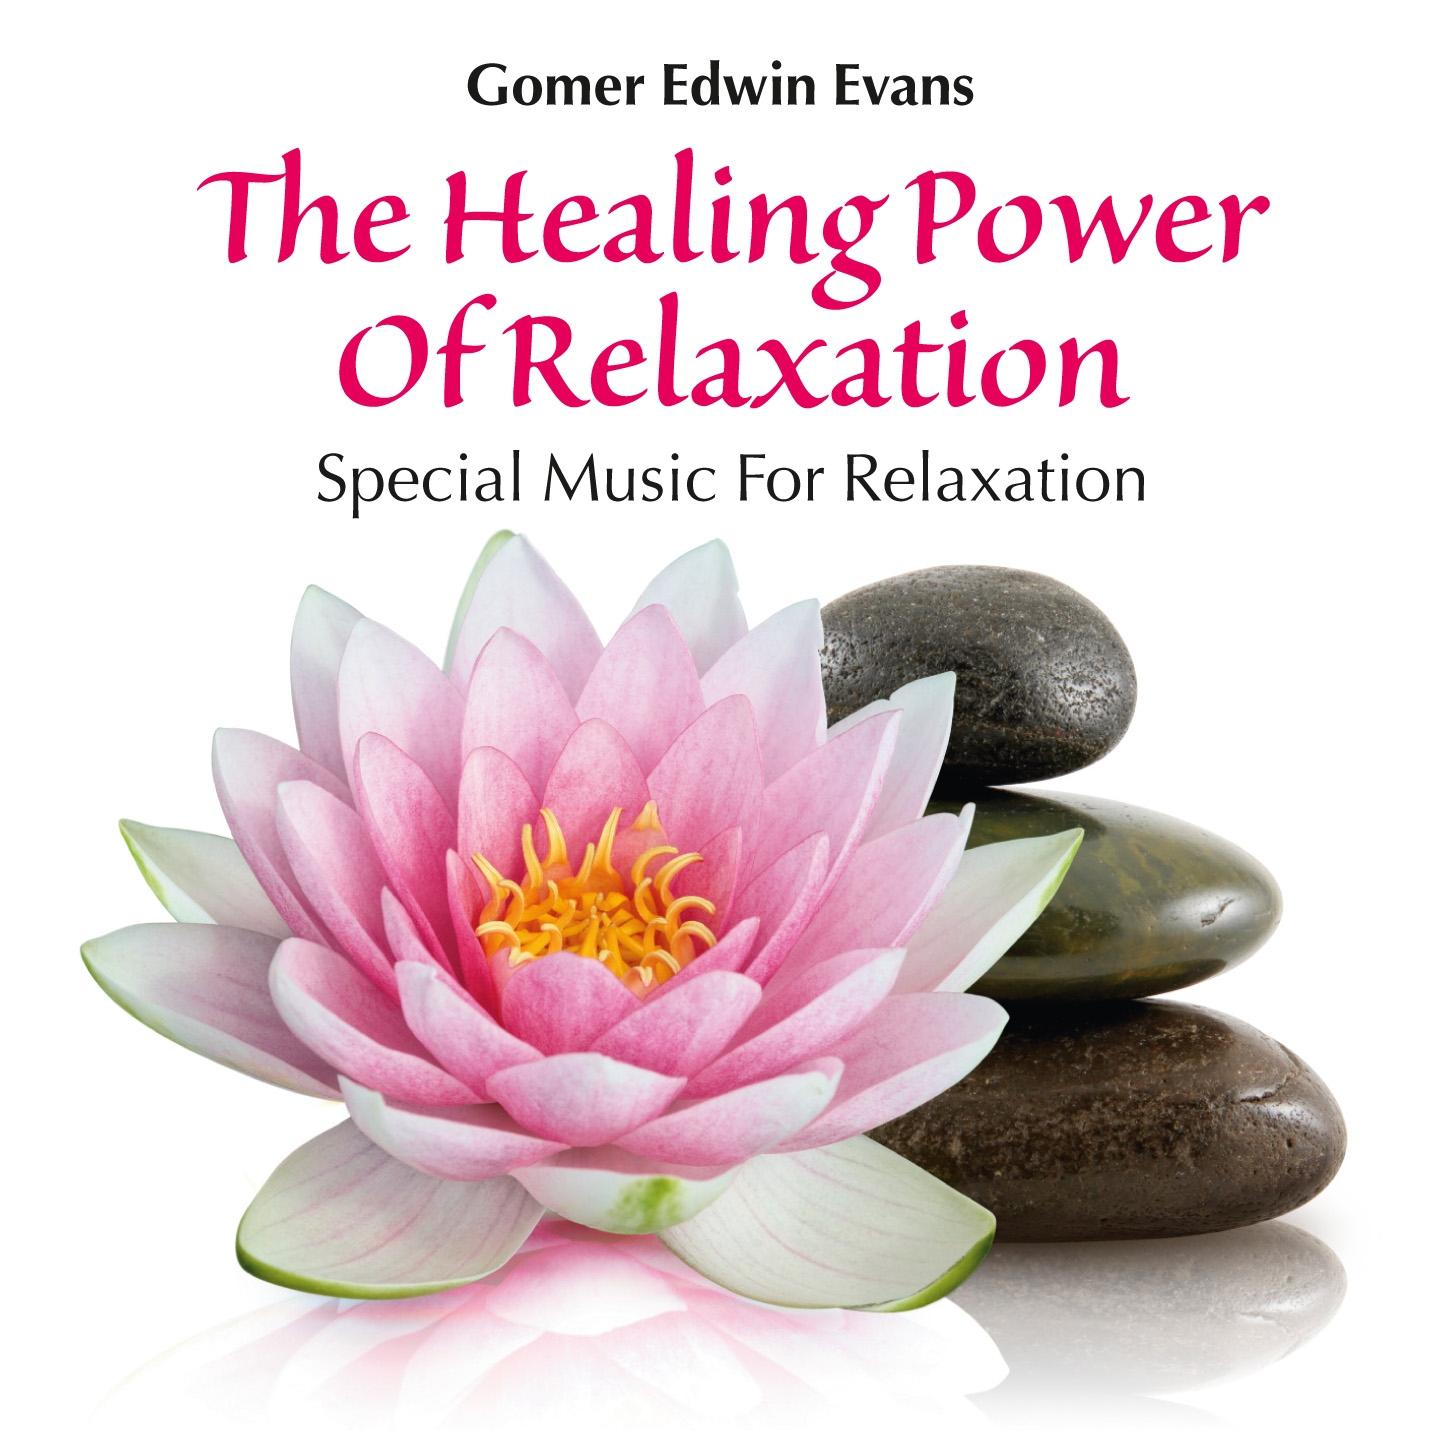 The Healing Power of Relaxation: Special Music for Relaxation